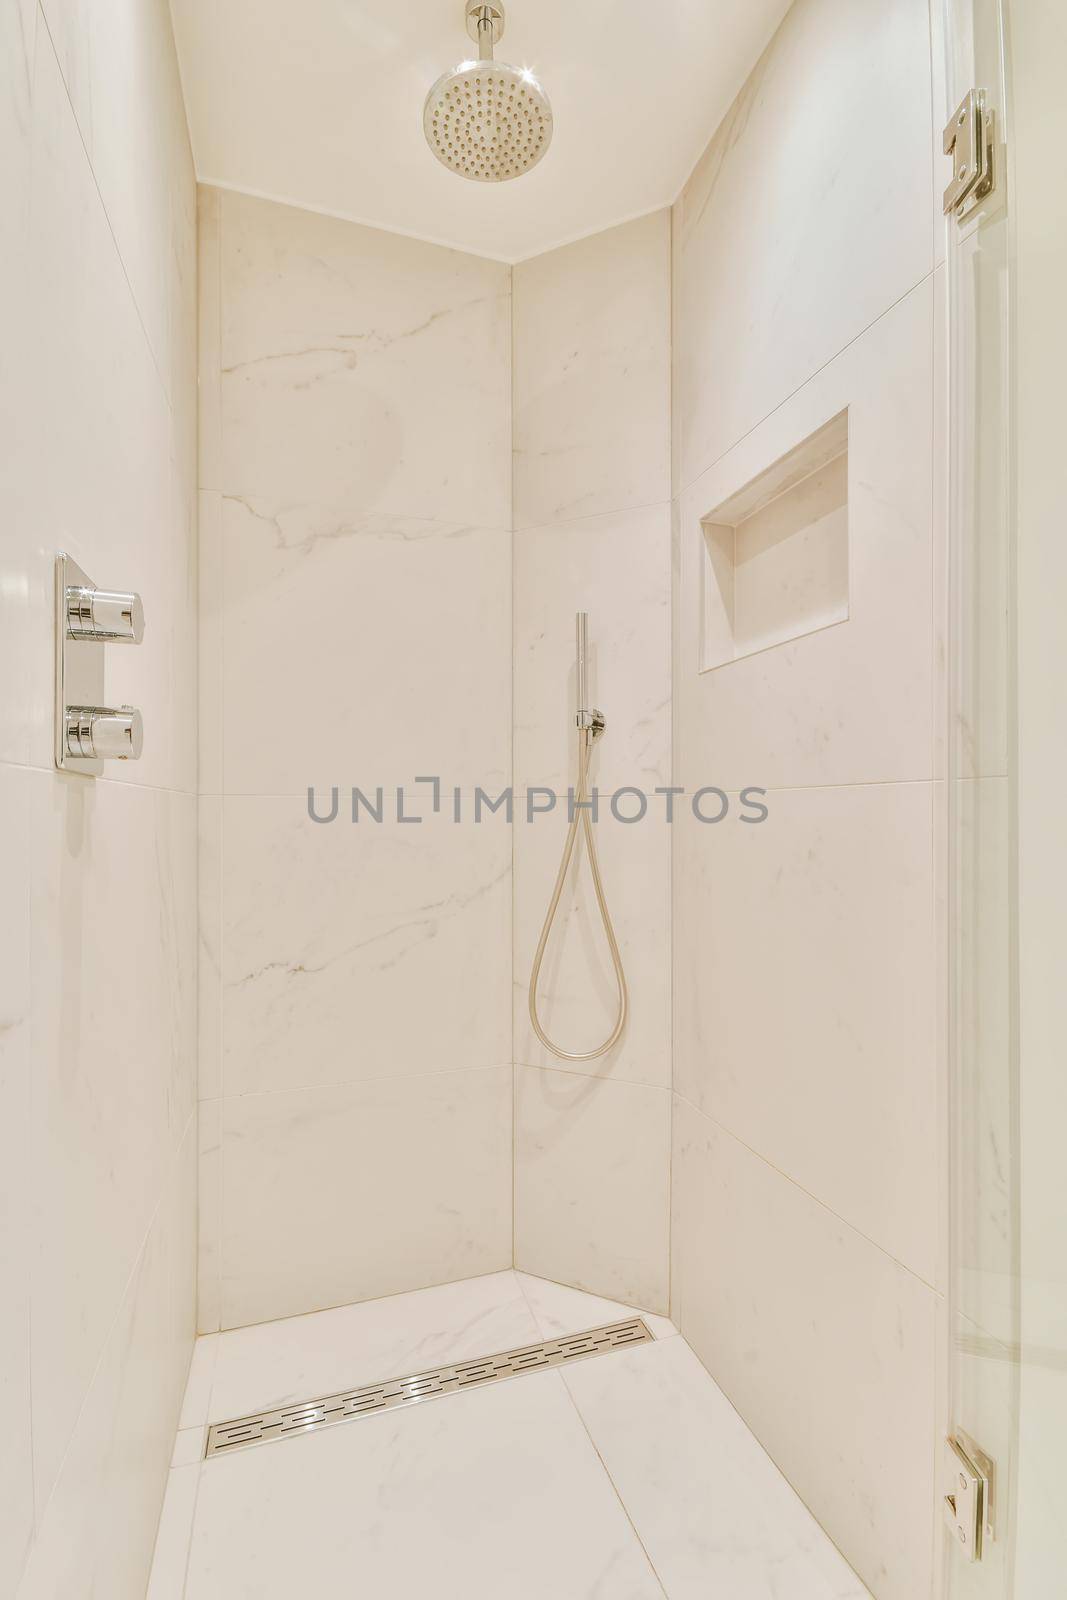 Luxurious bathroom with built-in shower head in the shower